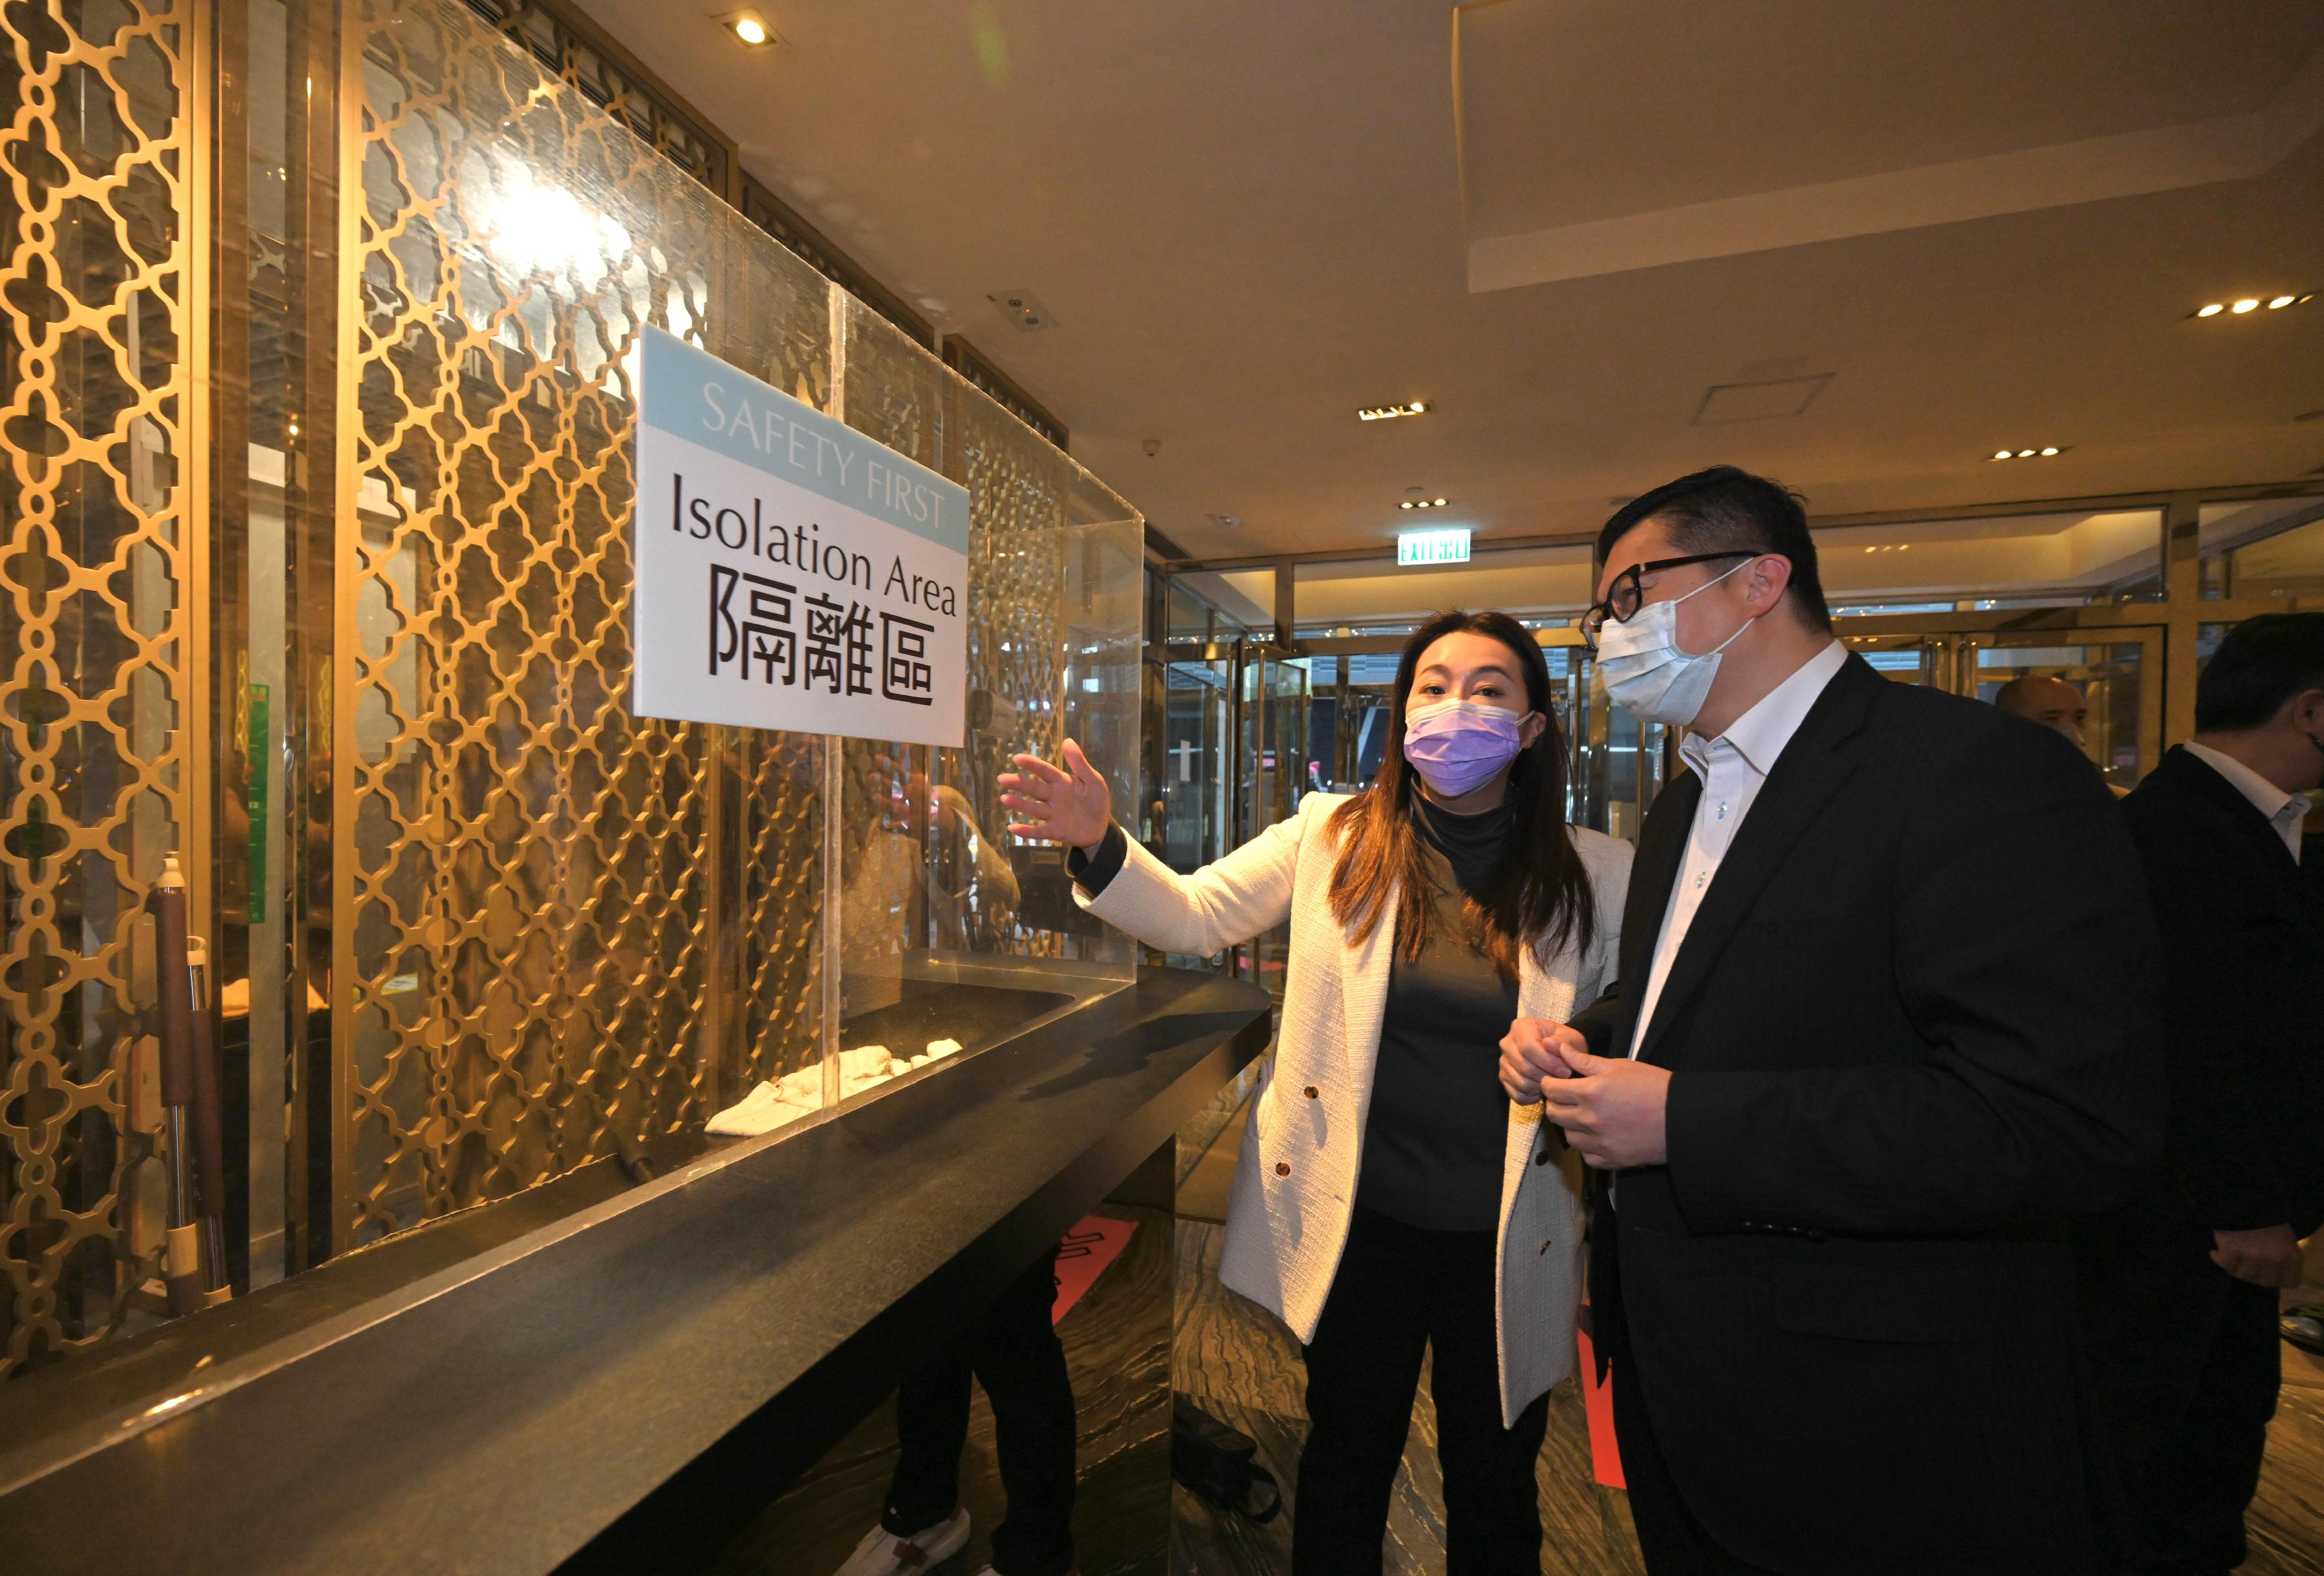 The Secretary for Security, Mr Tang Ping-keung, inspected the Dorsett Tsuen Wan, Hong Kong this afternoon (February 17), ensuring the first hotel turned into a community isolation facility is ready. Photo shows Mr Tang (right) learning from the President and Executive Director, Dorsett Hospitality International, Ms Winnie Chiu (left), about the preparatory work for turning the hotel into the community isolation facility.